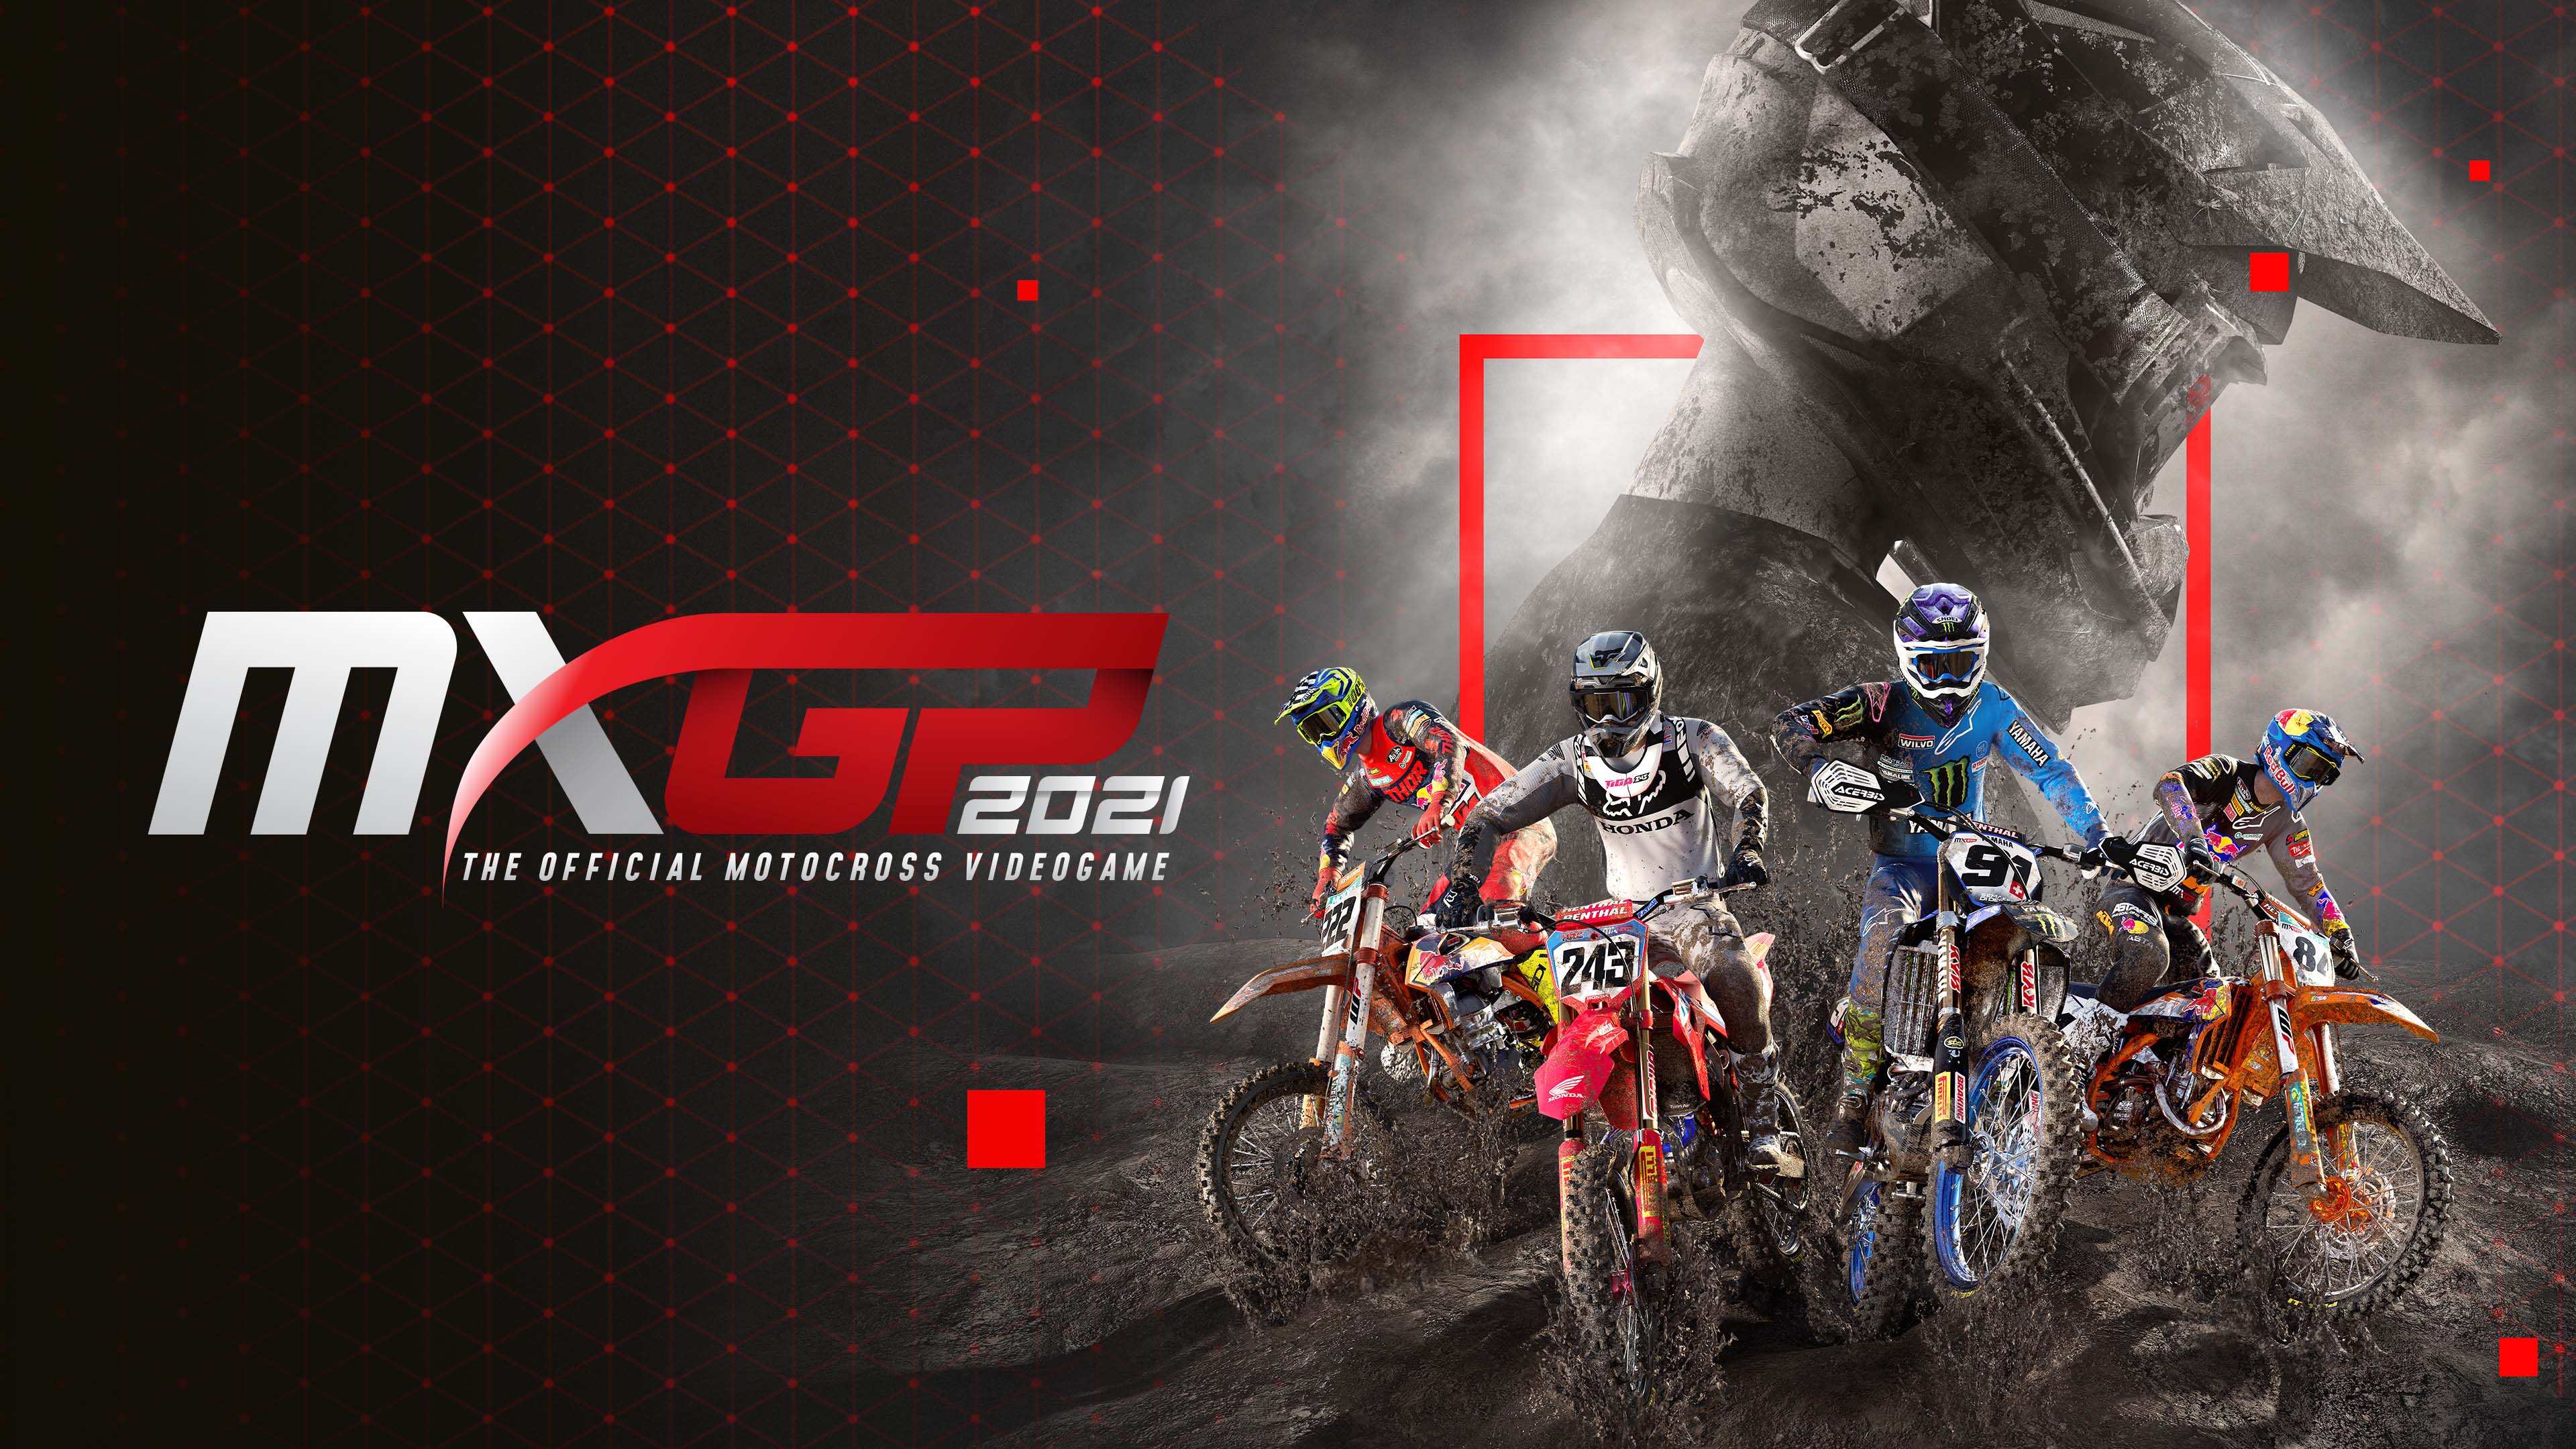 MXGP 2021 - The Official Motocross Videogame (영어)